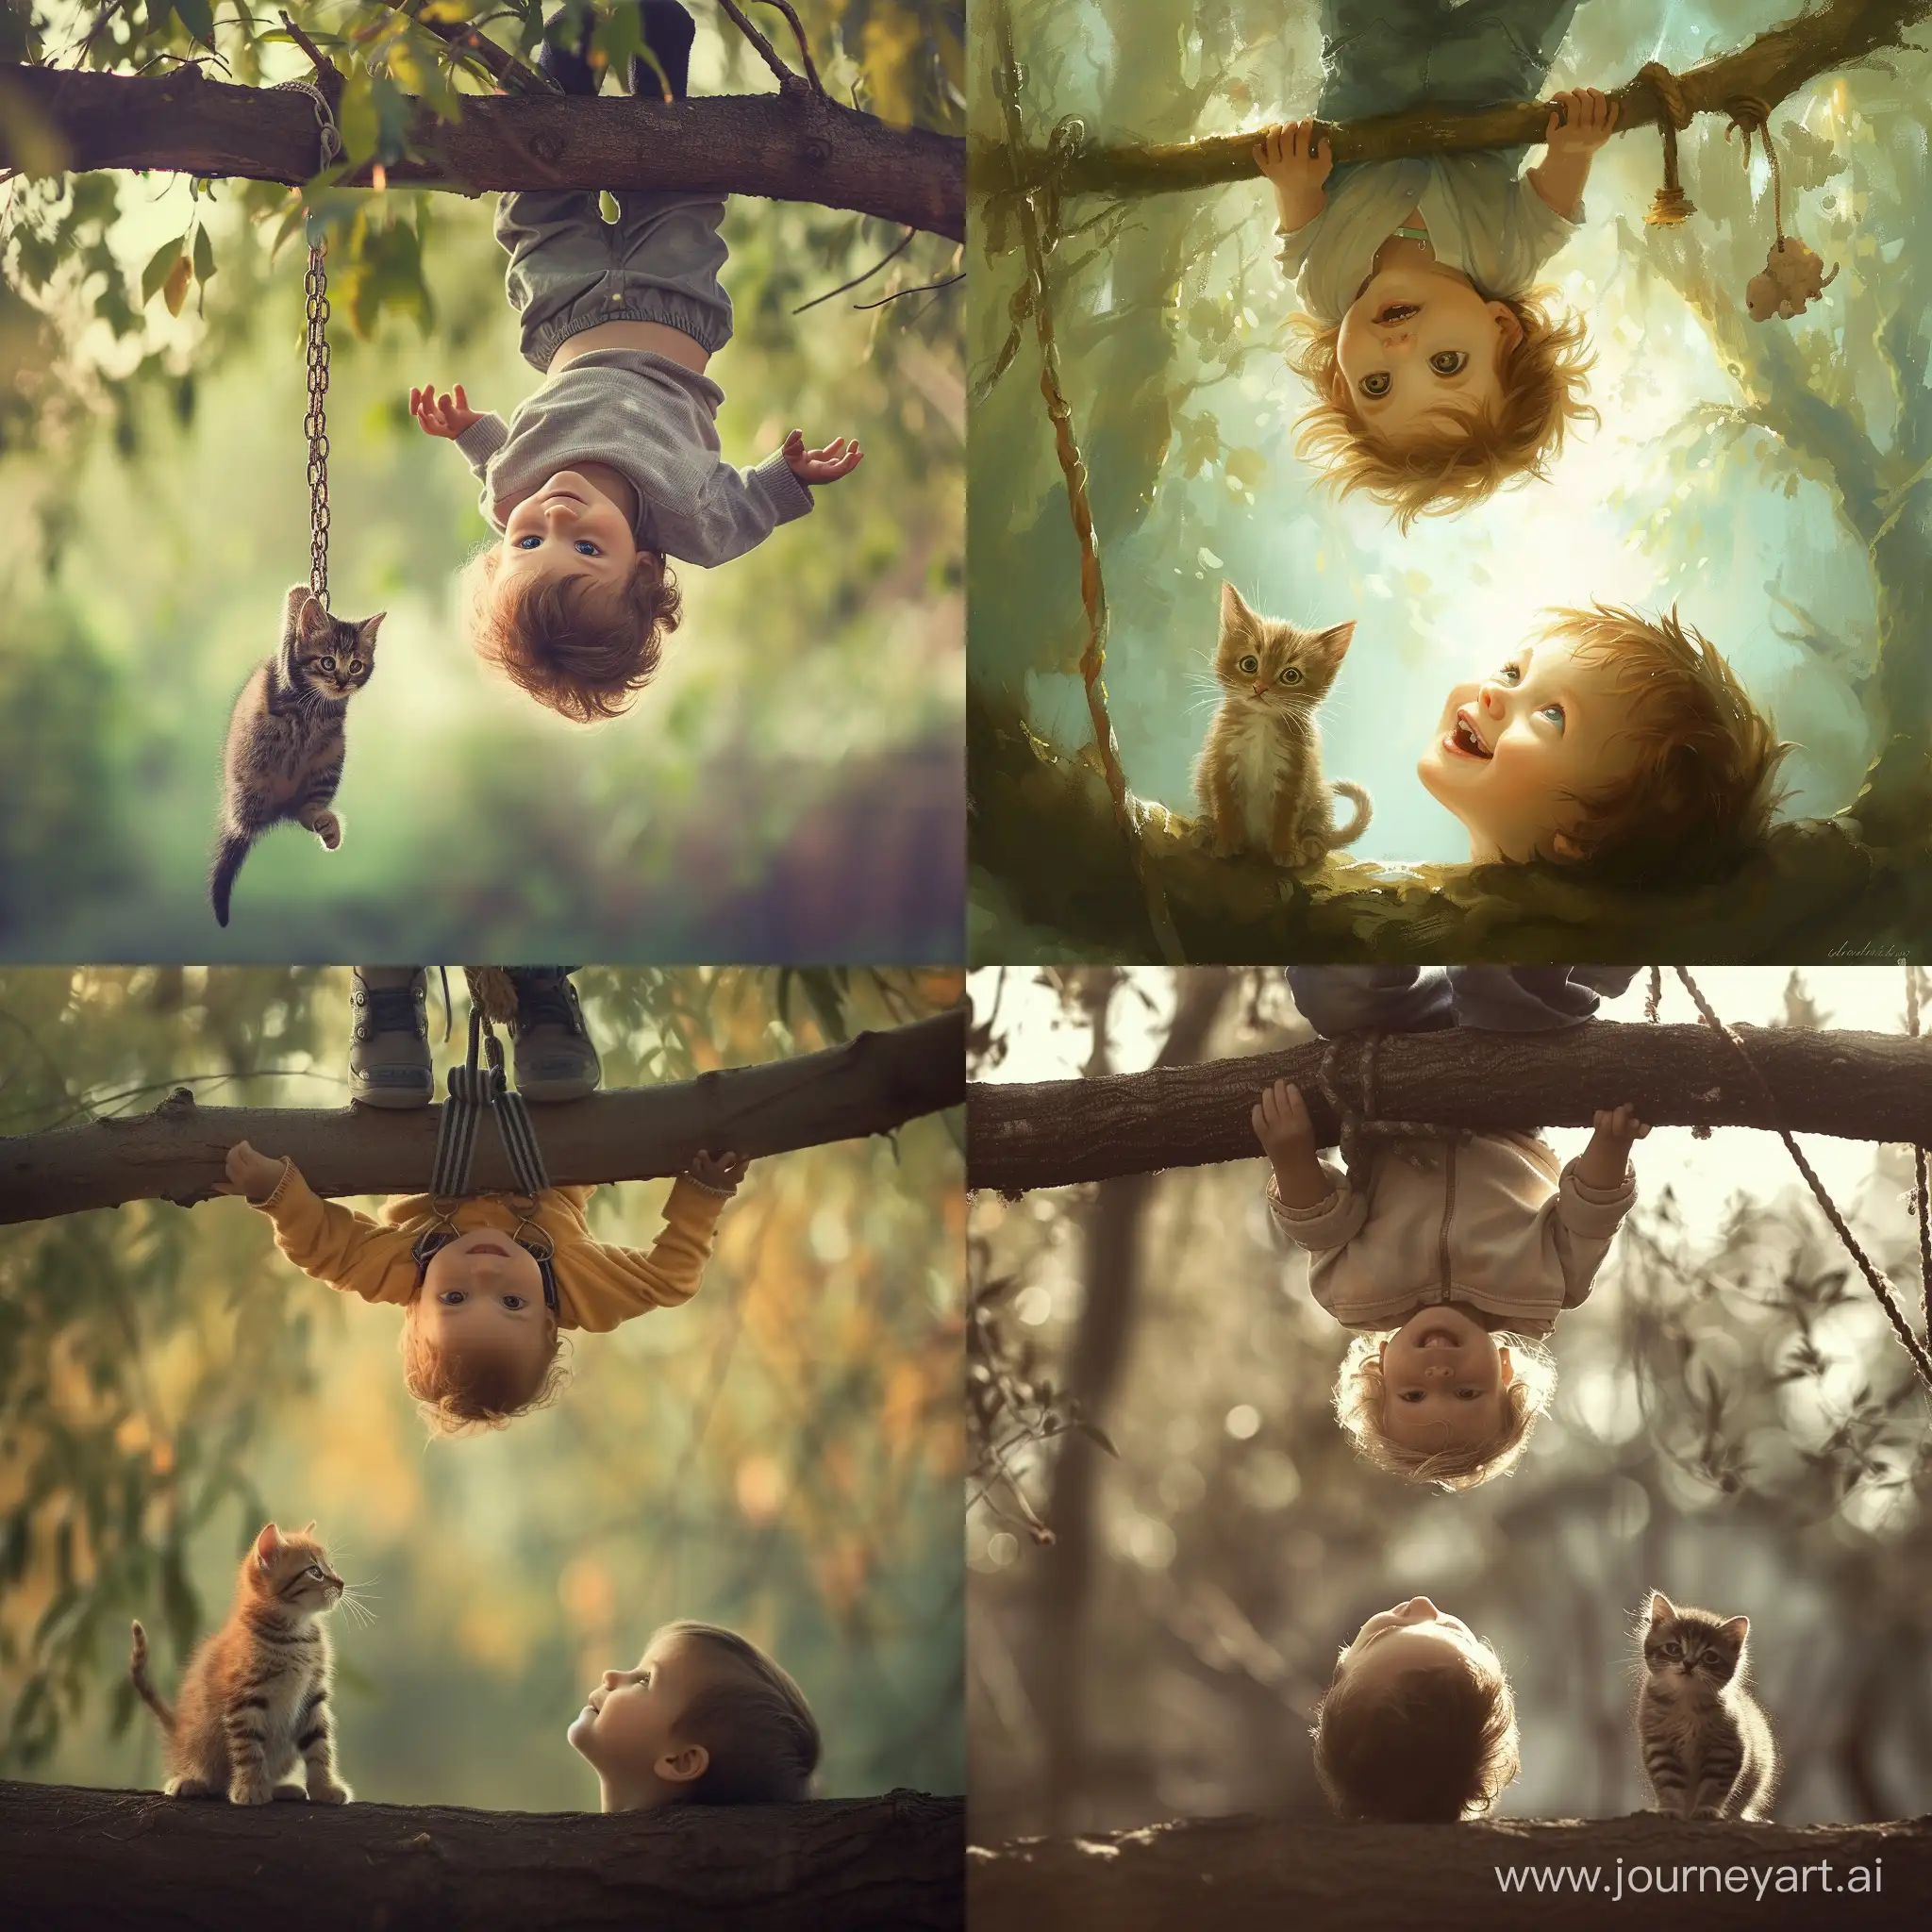 Playful-Childhood-Joy-Happy-Child-Hanging-Upside-Down-with-Curious-Kitten